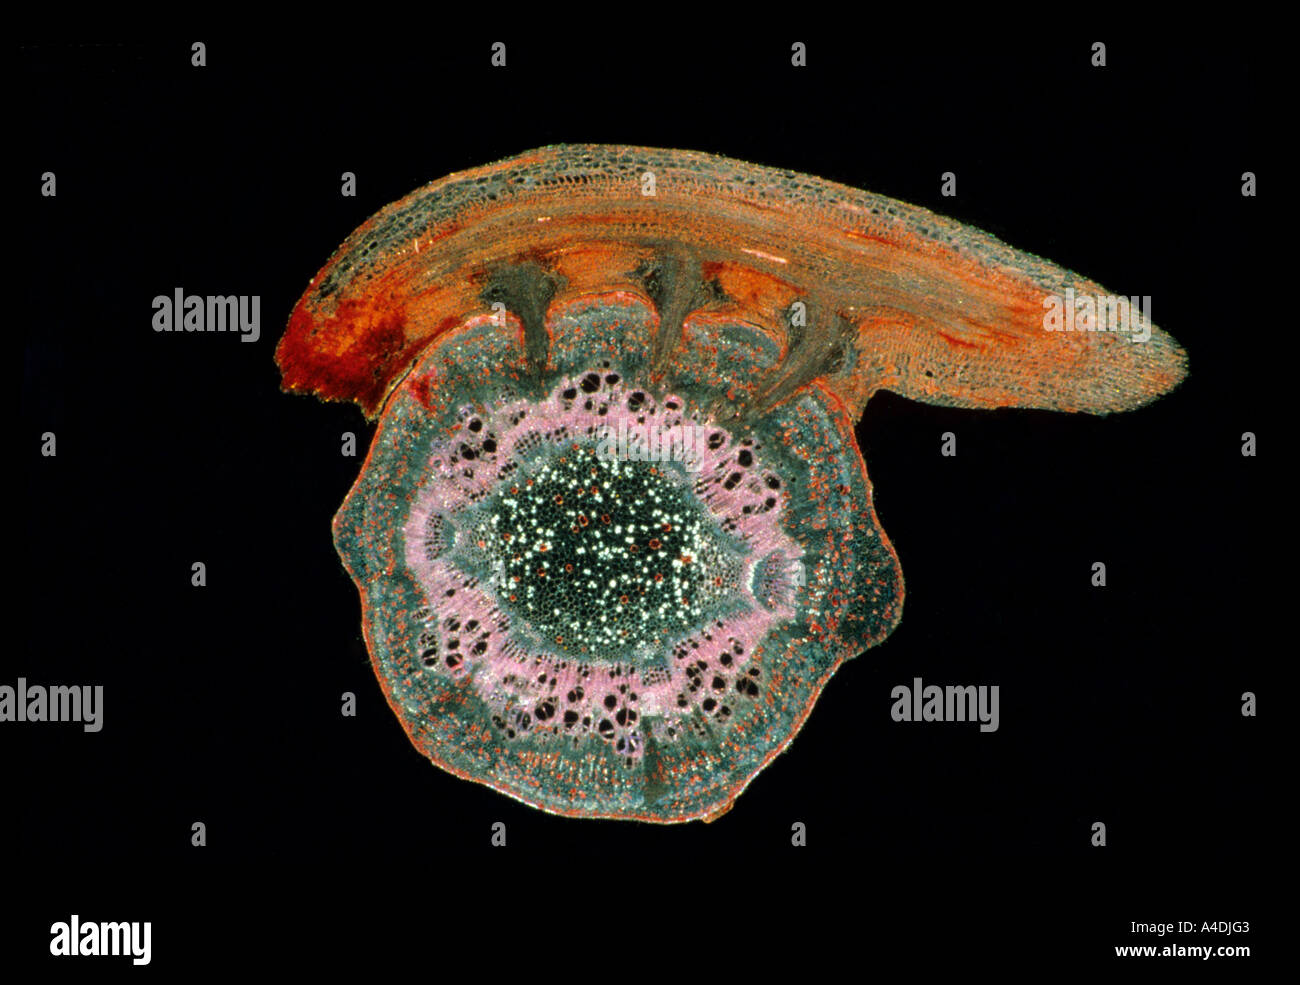 Photomicrograph of sectioned dodder, Cuscuta, showing haustoria that penetrate the host's tissue. Stock Photo